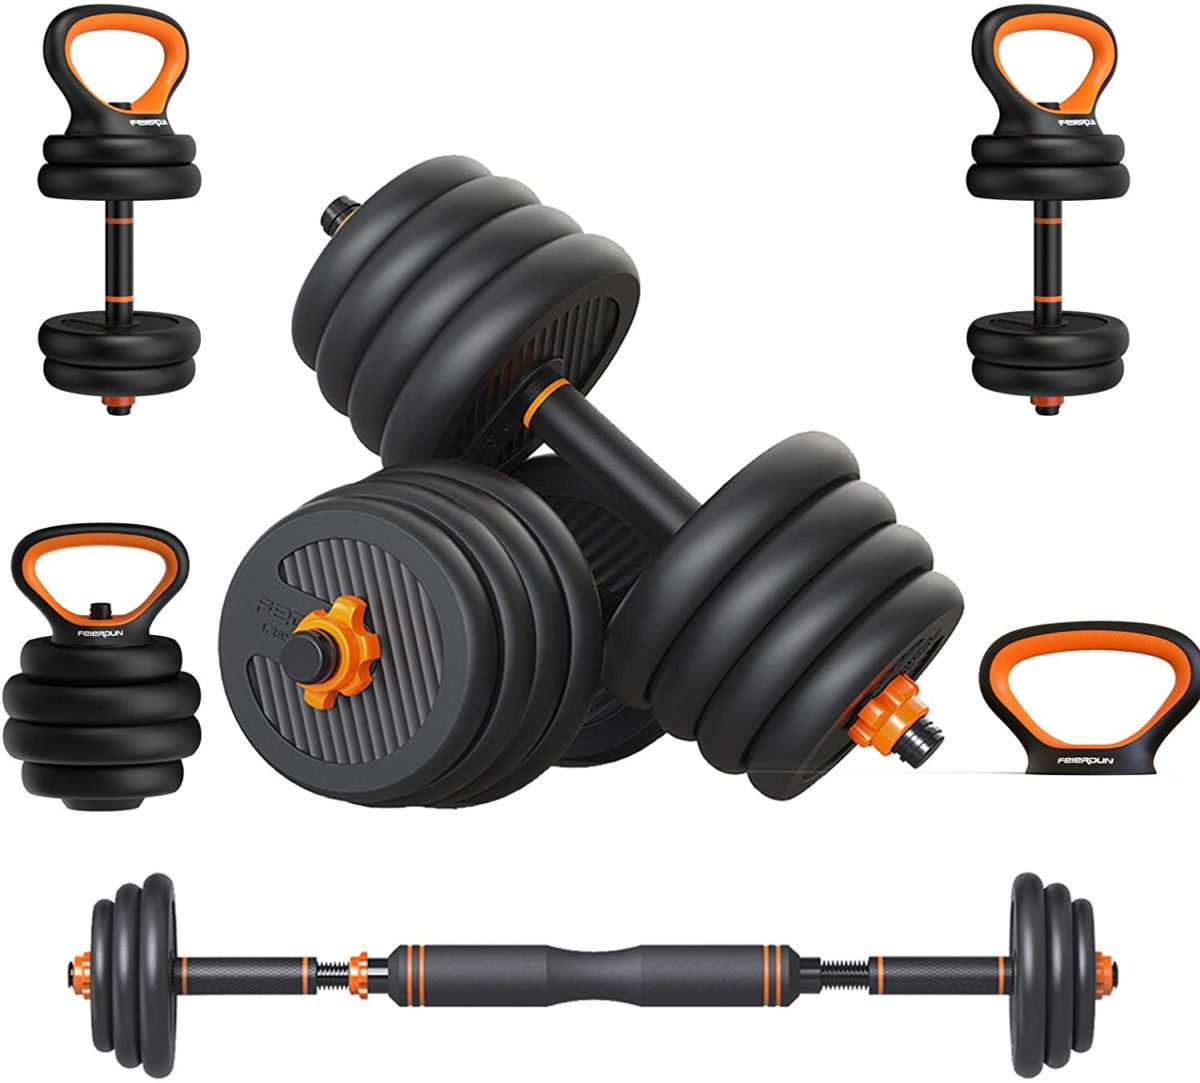 31 of Best Pieces of Workout Equipment You Can Buy on Amazon for Your Home Gym | With that said, here are 31 pieces of workout equipment you can buy on Amazon.